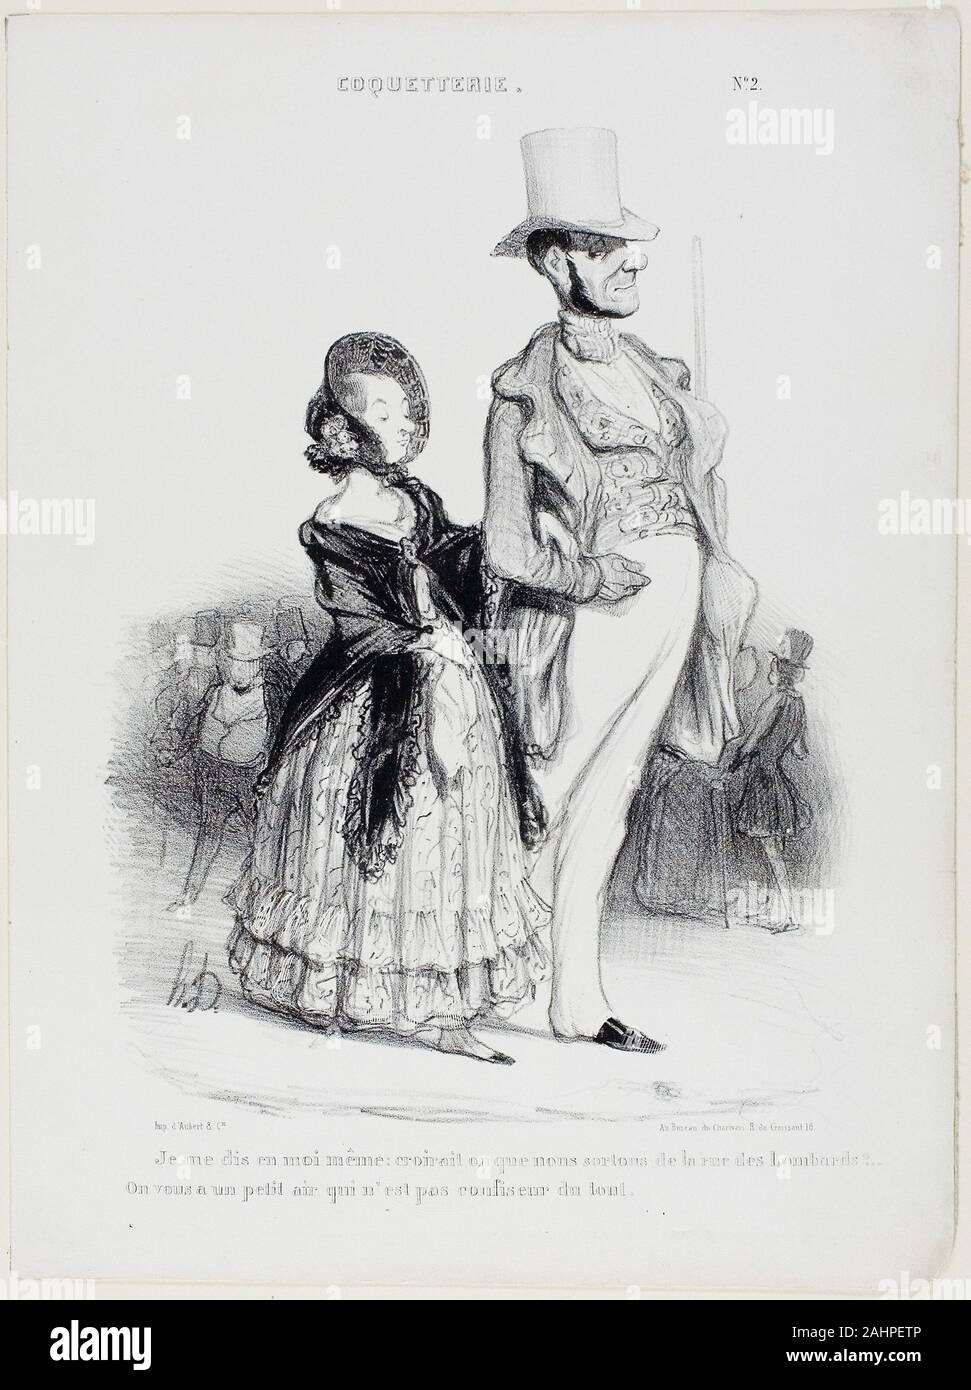 Honoré-Victorin Daumier. “I say to myself would anybody imagine that we are coming from the Rue des Lombards ... We really don't look like confectioners at all,” plate 2 from Coquetry. 1839. France. Lithograph in black on white wove paper Stock Photo